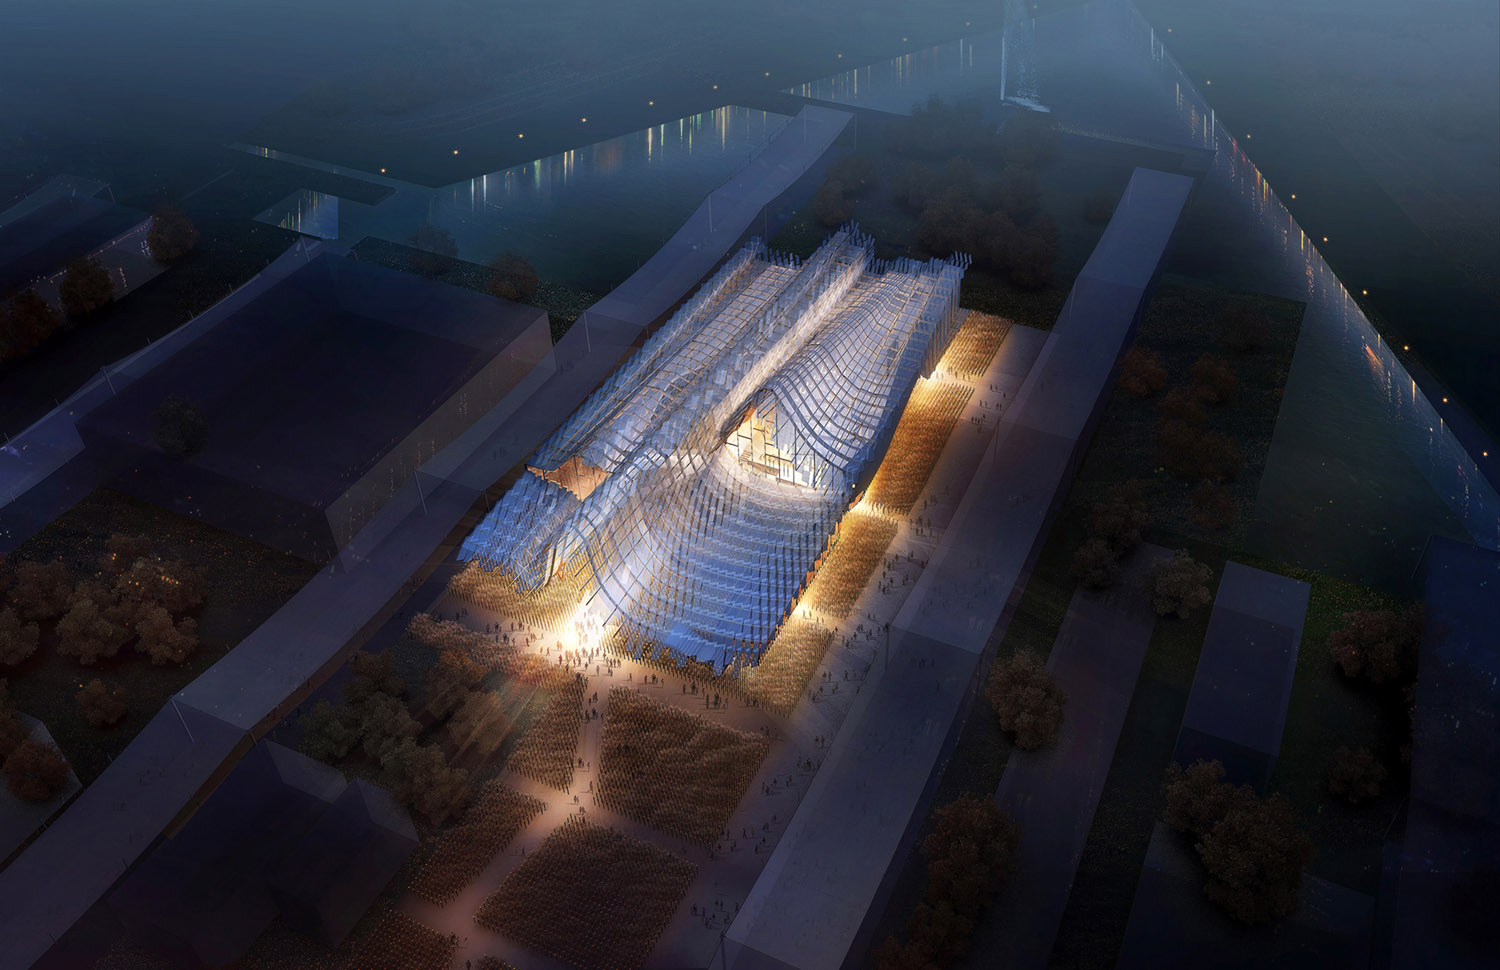 China Pavilion at the 2015 Milan Expo designed by Tsinghua University and Studio Link-Arc